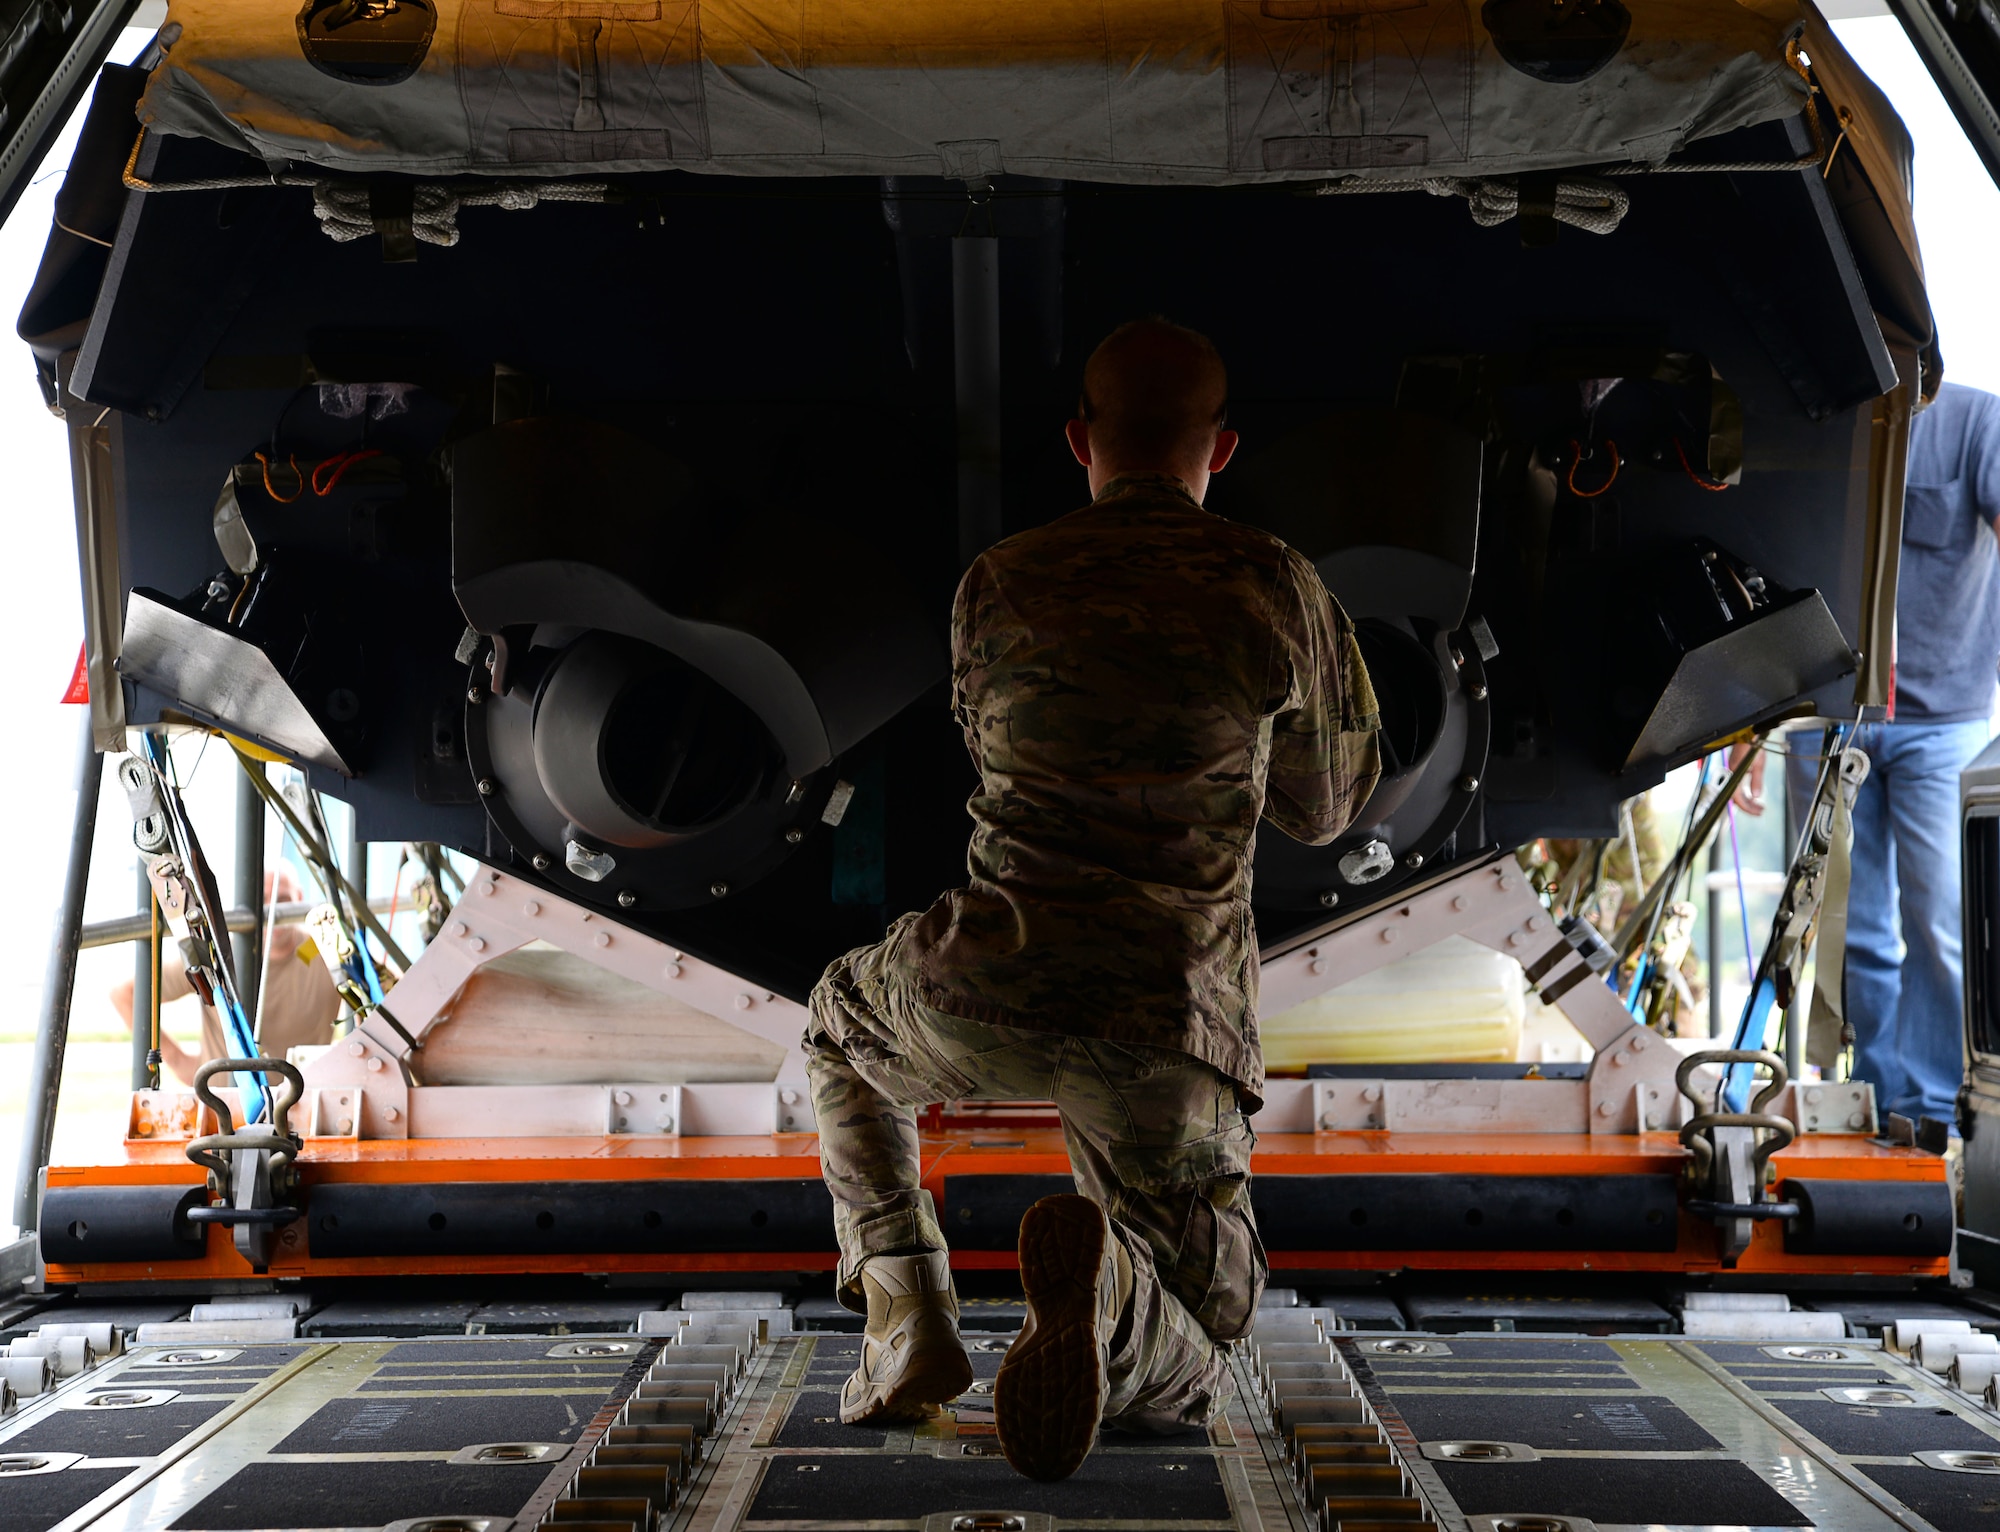 A U.S. Air Force MC-130J Commando II loadmaster, assigned to the 67th Special Operations Squadron makes guidance calls to load a Rigid Inflatable Boat onto an MC-130J Commando II in preparation for a Maritime Craft Aerial Delivery drop Sept. 26, 2016, at Stuttgart Air Base, Germany. The MCADS is the only airdrop system currently capable of deploying RIBs. The RIB is loaded onto the aircraft on a platform that must be carefully aligned due to the sheer size of the cargo. (U.S. Air Force photo by Senior Airman Justine Rho)